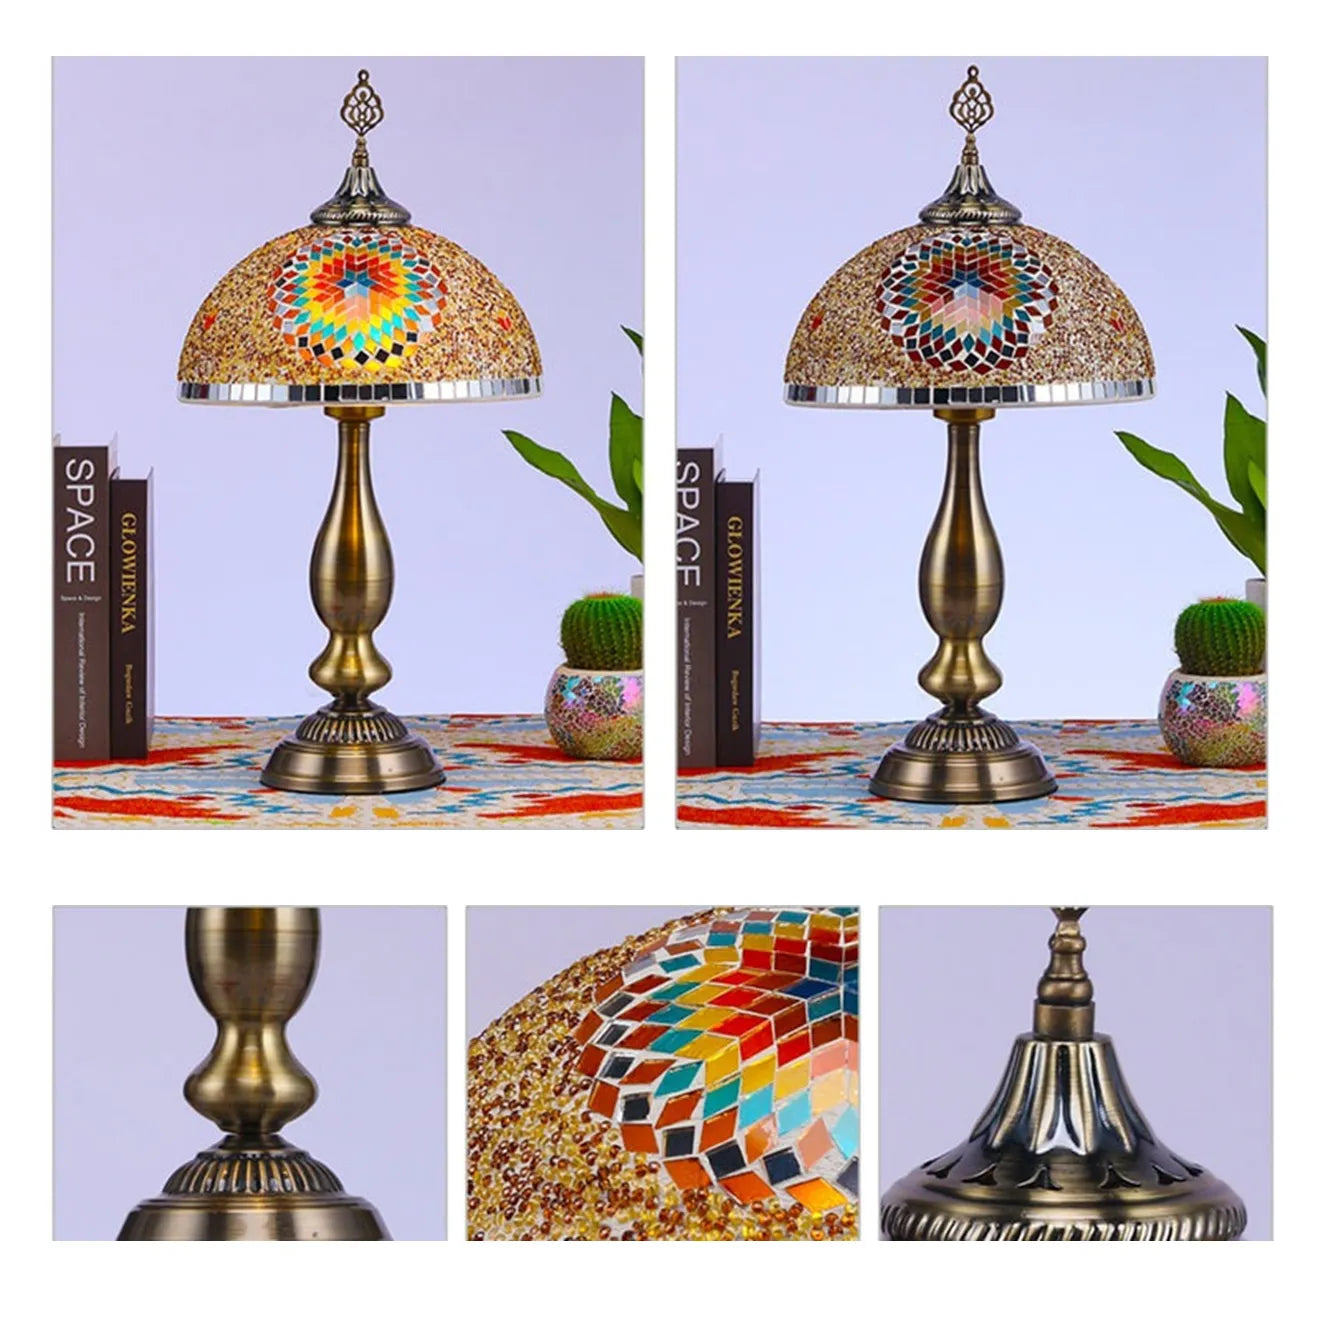 handmade-bohemian-classic-vintage-style-table-warm-light-lamp-handcrafted-home-decor-multi-colour-royal-looking-elegant